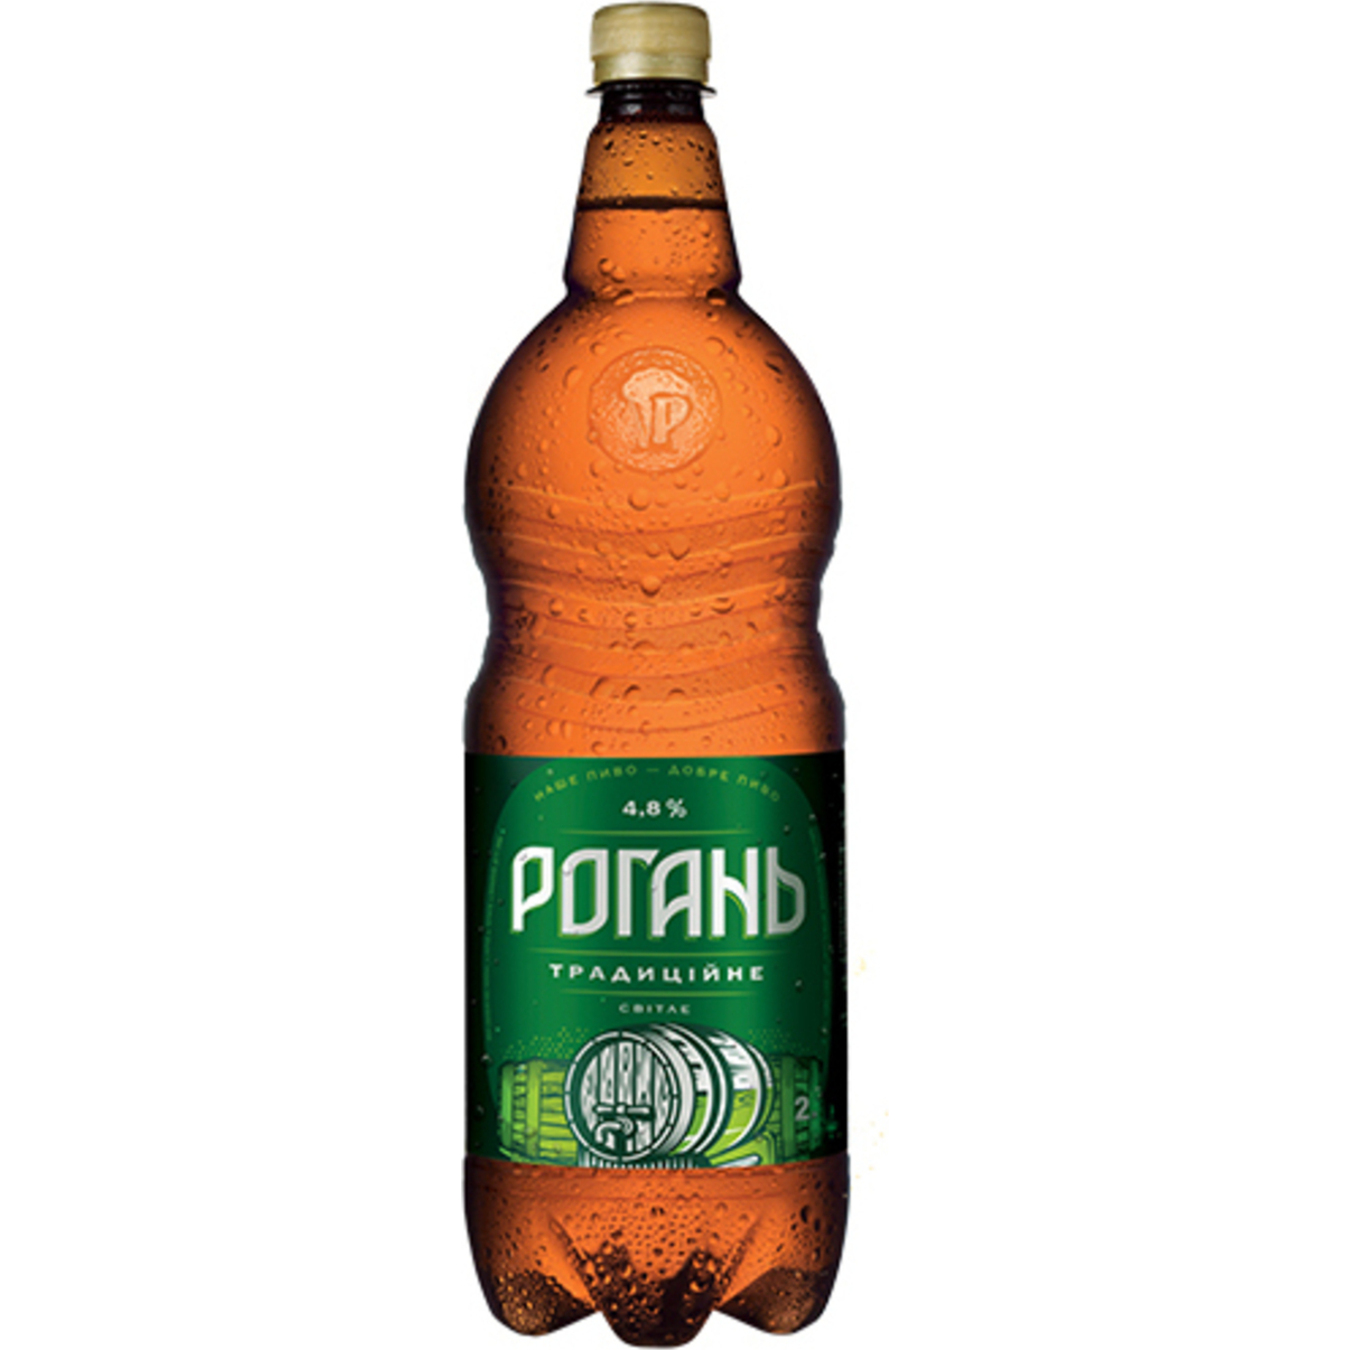 Light beer Rohan Traditional 4.8% 2 l